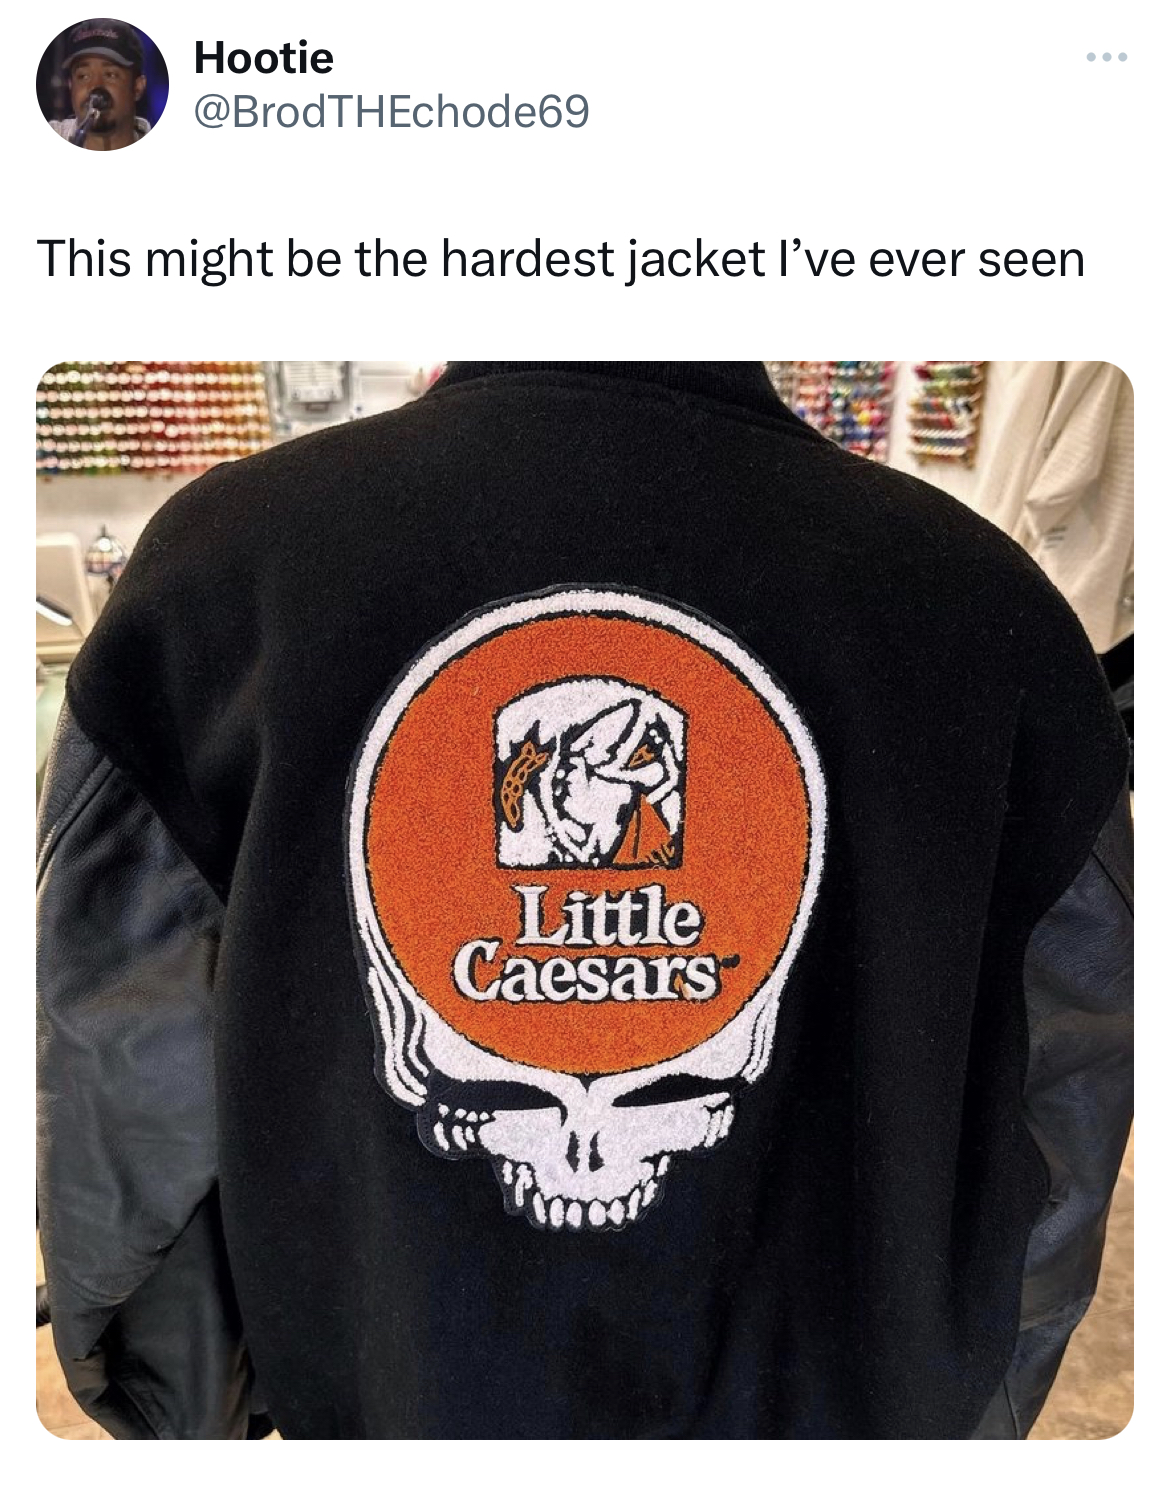 savage tweets - little caesars pizza - Hootie THEchode69 This might be the hardest jacket I've ever seen Ka Little Caesars